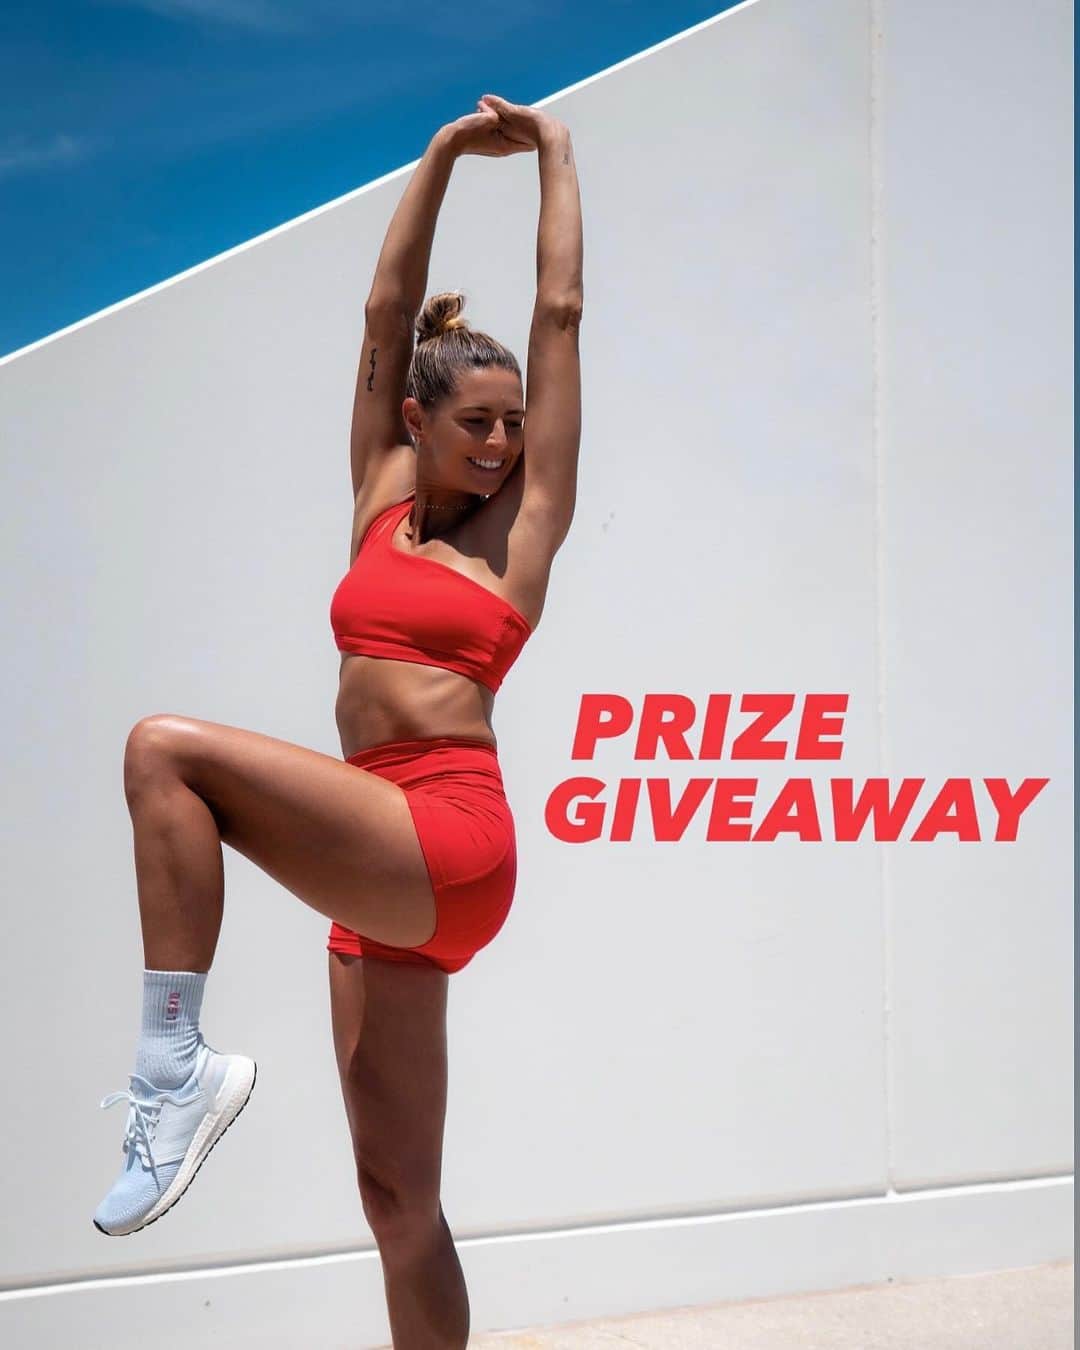 Amanda Biskのインスタグラム：「Get fit, win BIG! 🌟 Join the Countdown to Christmas fitness challenge and finish off the year with a BANG! 💪🏼  15min workouts, yoga & pilates classes with me, every day for 25days…can you do it?!  🏆 MAJOR PRIZES 🏆  $2000 USD CASH!! 💸 (International entrants only)  @samsungau PRIZE PACK 📱⌚️ (Australian entrants only) • Galaxy Z Flip 5 phone • Galaxy Watch 6 • BudsFE earbuds and, • SmartTags (pack of 4)  plus…  🎁 WEEKLY SAMSUNG GIVEAWAYS 🎁 (Australian entrants only) Every week, for 4 weeks you have the chance to win: Galaxy Watch 6, BudsFE and SmartTags (pack of 4)  HOW TO ENTER: 1. Join the challenge on #freshbodyfitmind app. Special Black Friday offer: $1/month (for 3months) only on the website www.freshbodyfitmind.com   2. Share your challenge here on insta! Photos, stories, posts…every time you share is an entry!  3. Tag: (Internationals wanting to win the cash) @amandabisk #freshbodyfitmind #countdowntochristmas  (Aussies wanting to win Samsung) *all the tags above PLUS: @samsungau (make sure you’re following too!)  This is not just a fitness challenge, it’s a celebration of your commitment to a stronger, healthier and more confident you before we wrap up 2023! 🎉  This is FBFM’s biggest prize giveaway EVER!! Don’t miss it!  🙌🏼 We start December 1st!! 🙌🏼  ab❤️x  #fitnesschallenge #giveaway #workoutchallenge #samsungpartner」